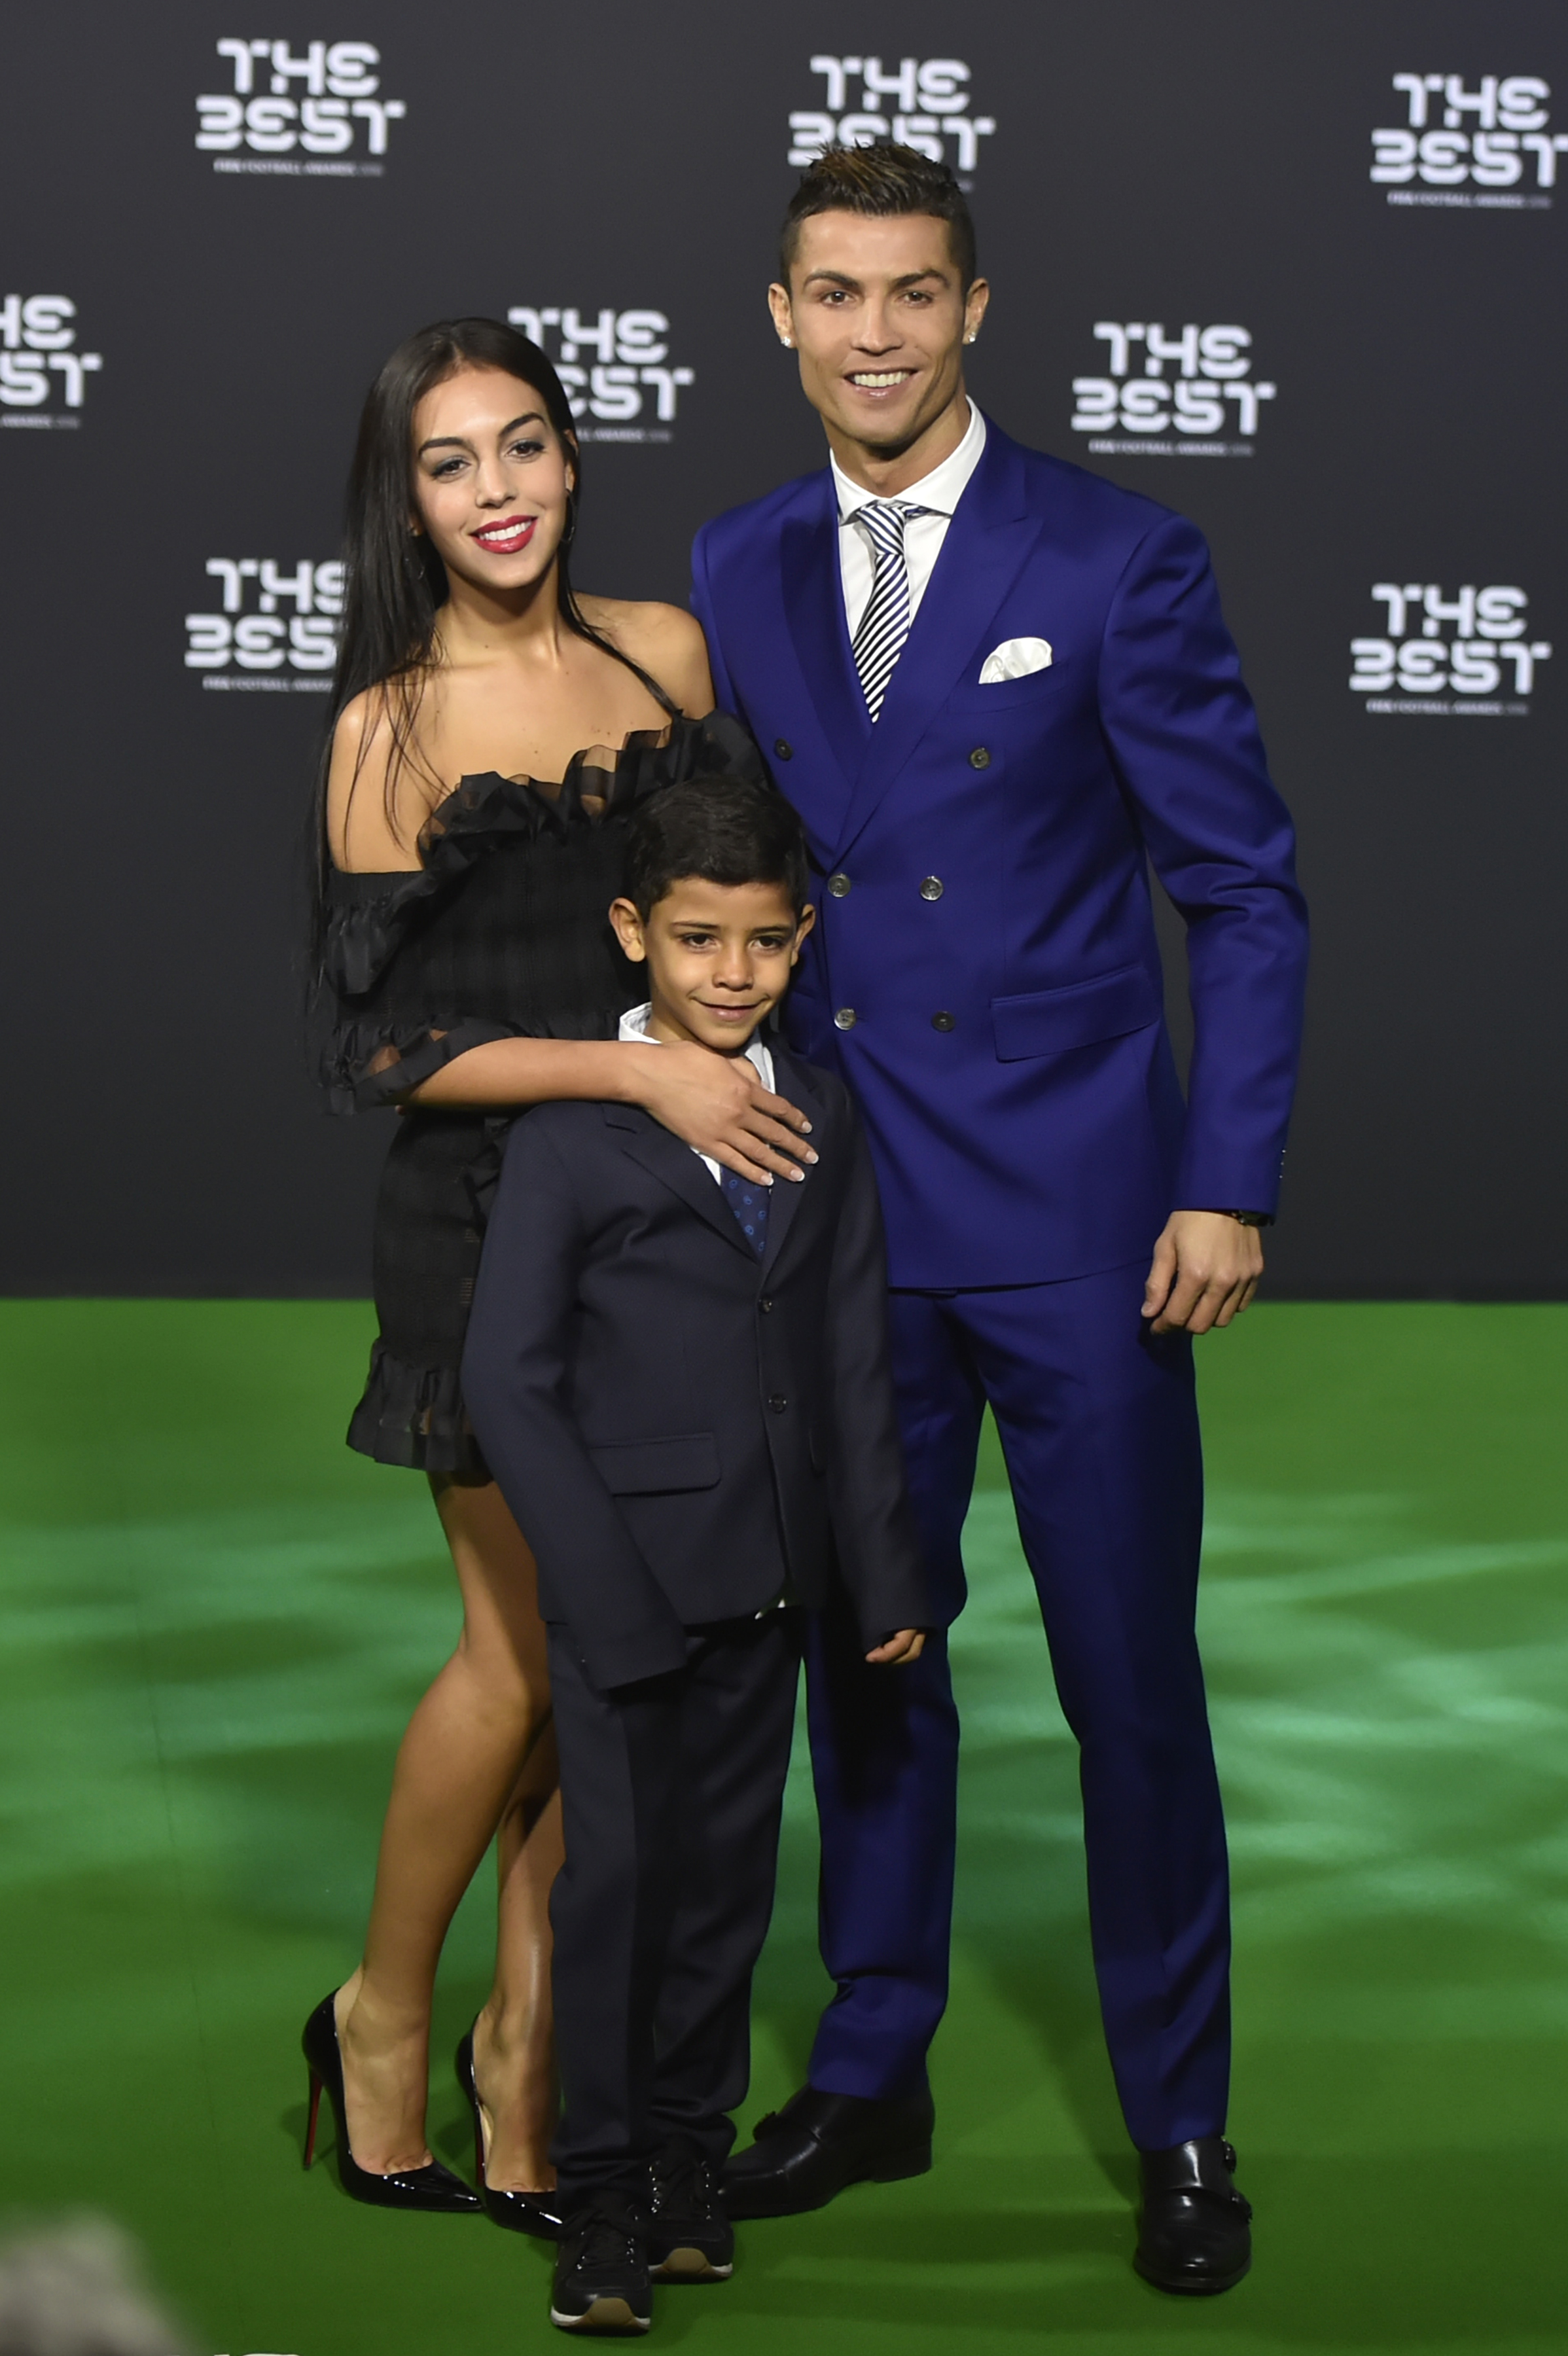 Cristiano Ronaldo with Georgina Rodriguez and his son Cristiano Ronaldo Jr as they arrive for The Best FIFA Football Awards 2016 ceremony, on January 9, 2017, in Zurich. | Source: Getty Images